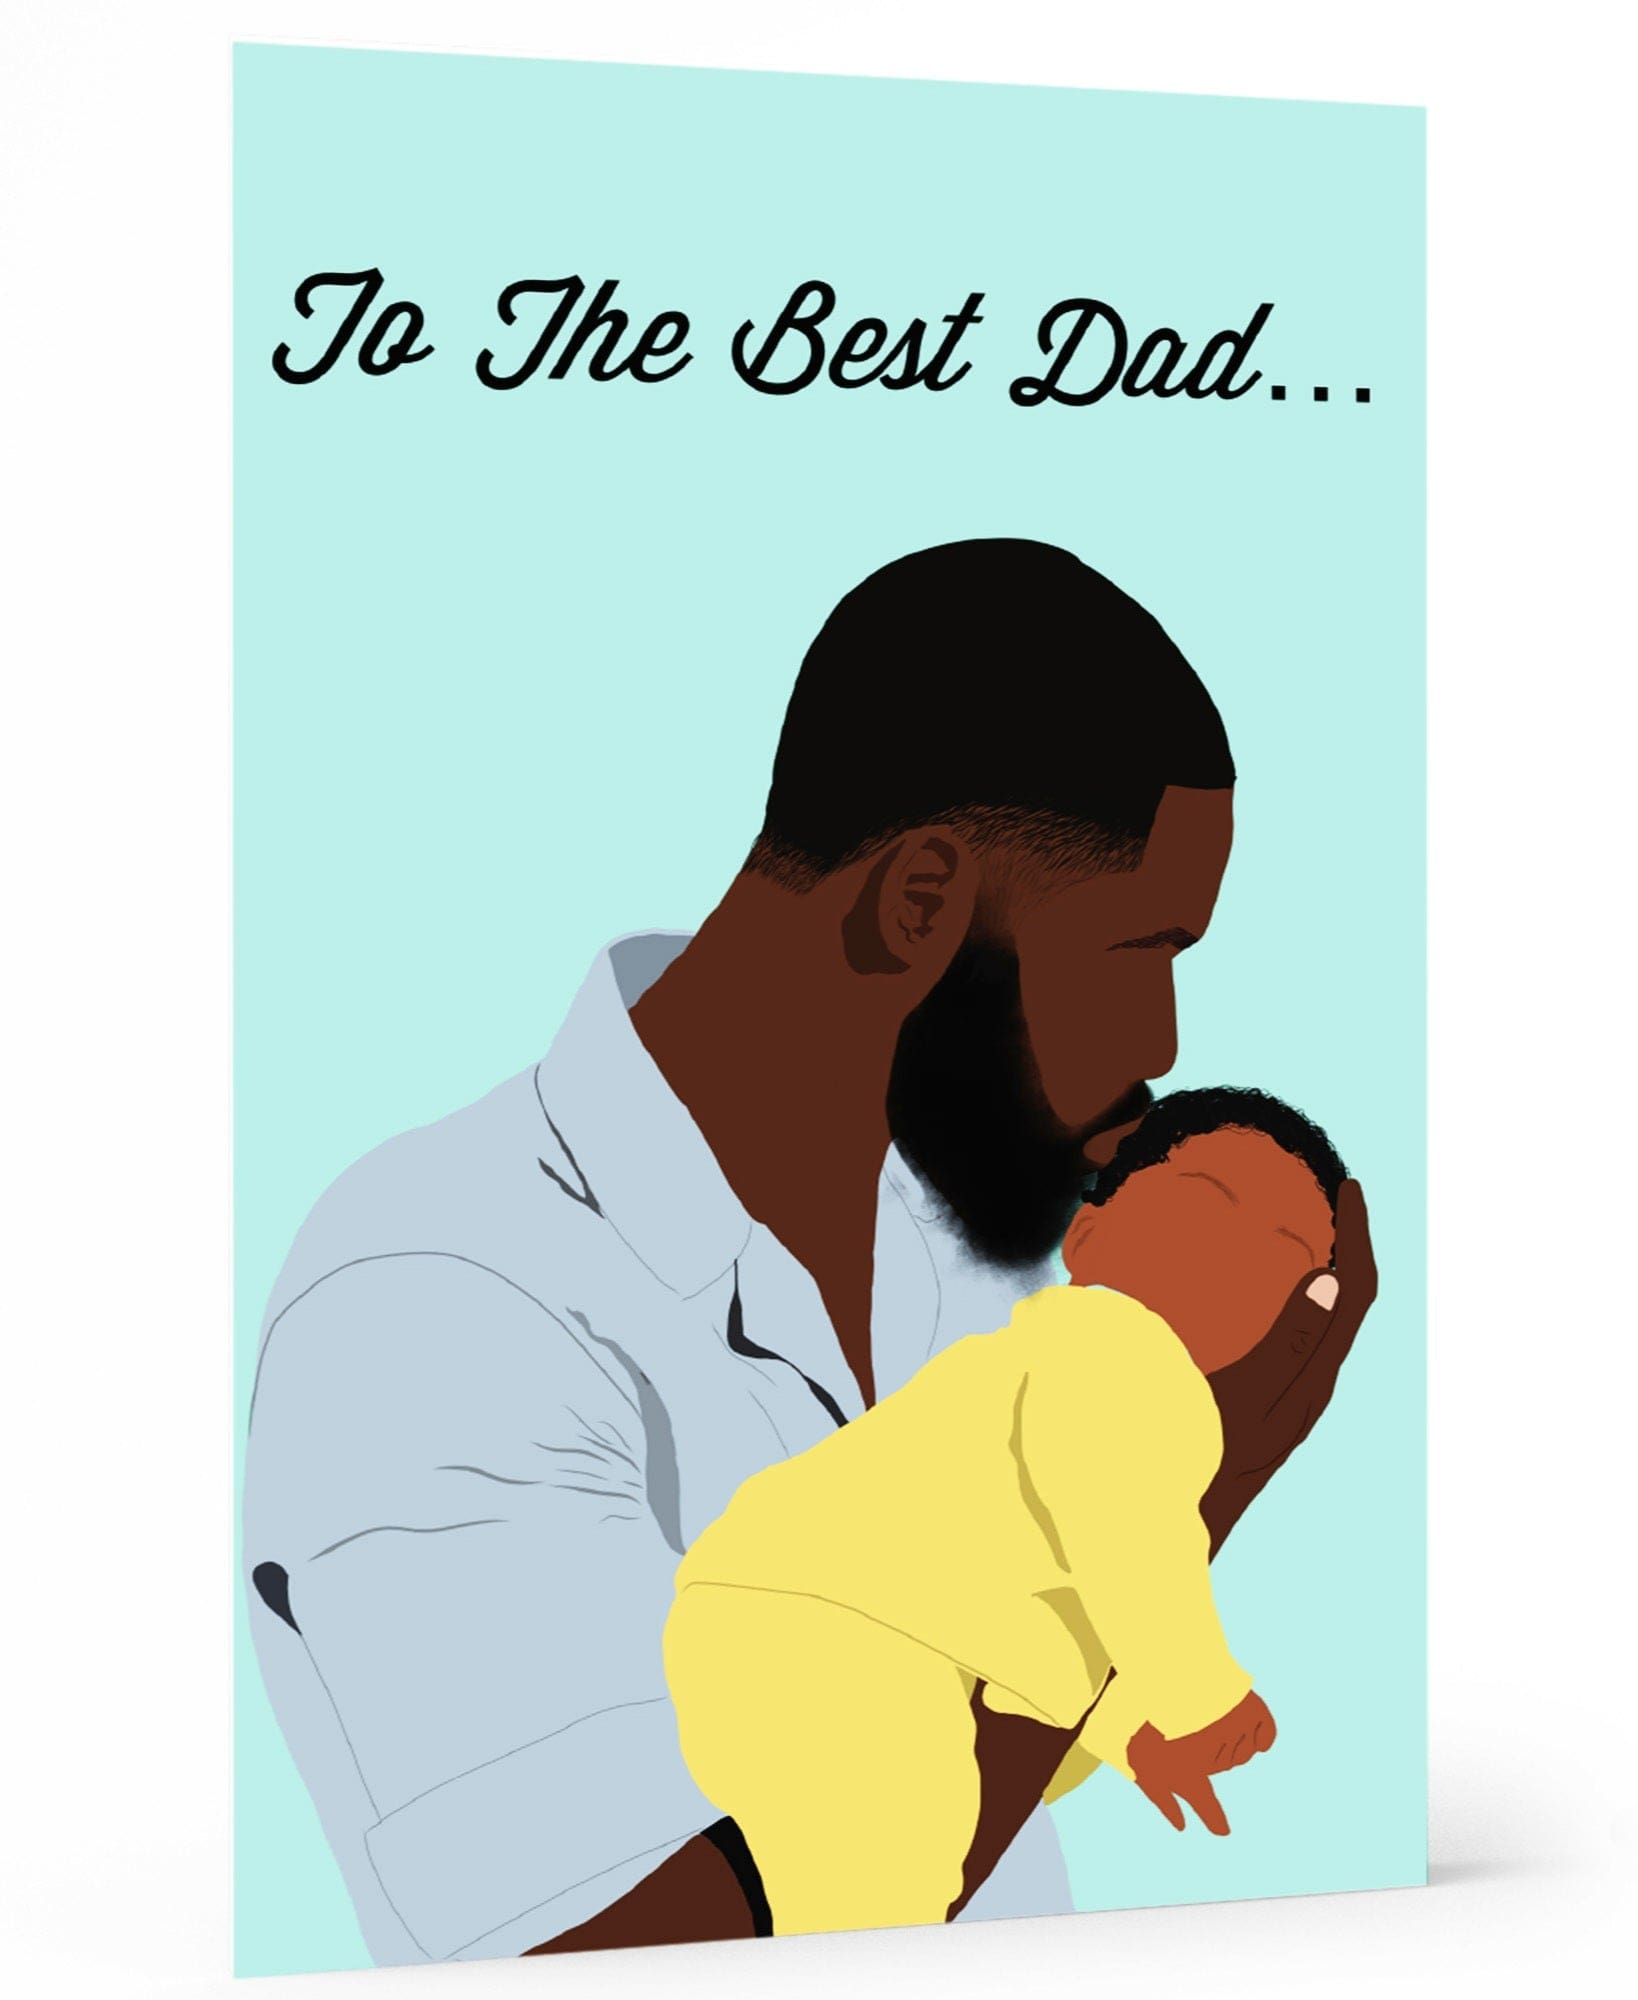 Dad Card, wakuda, african print fans, black-owned brands, black pound day